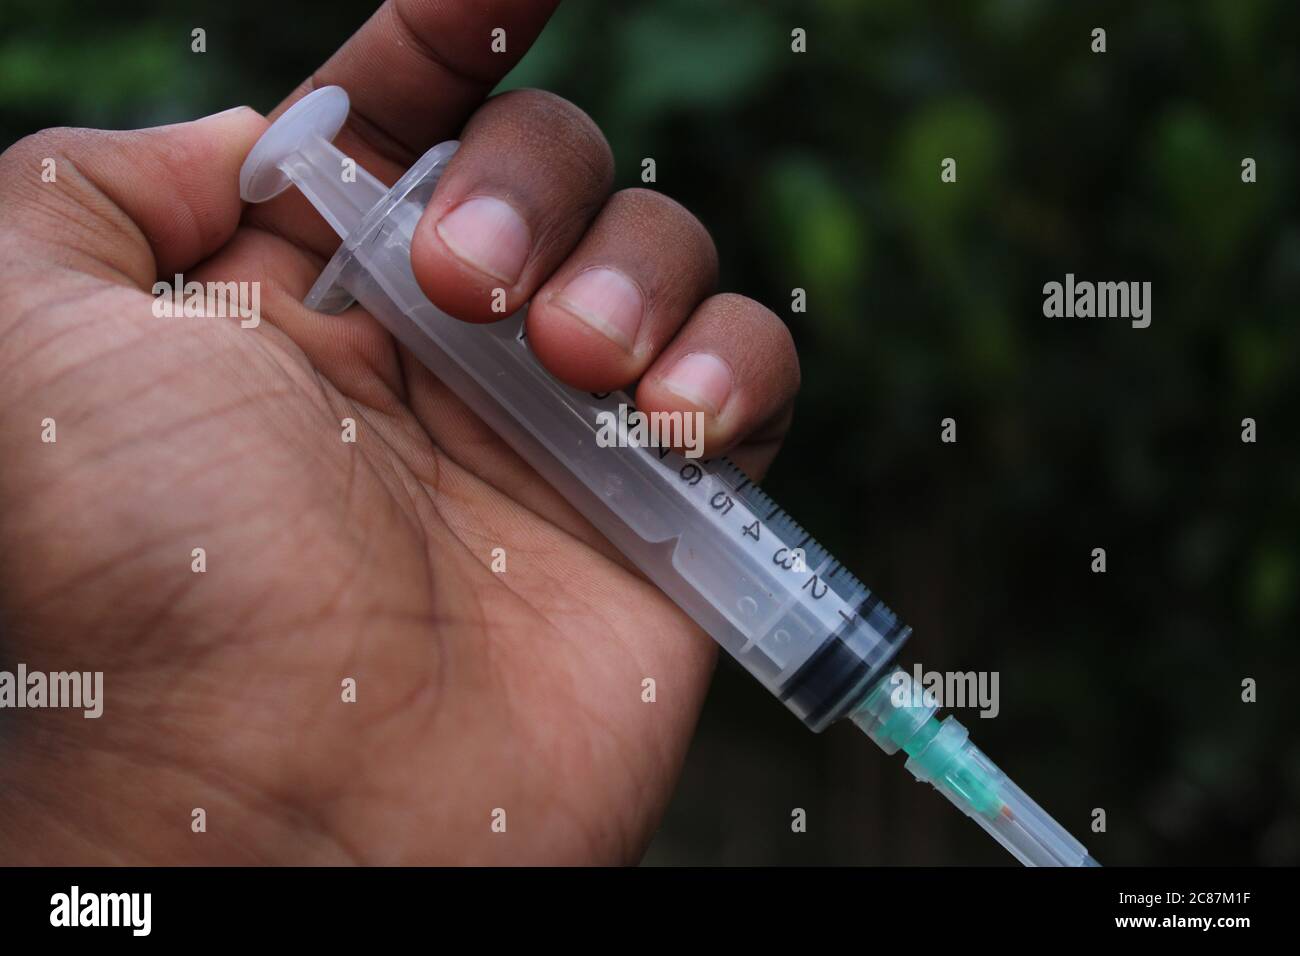 Disposable Syringe On The Hand With Natural Photo Capture From Bangladesh Stock Photo Alamy